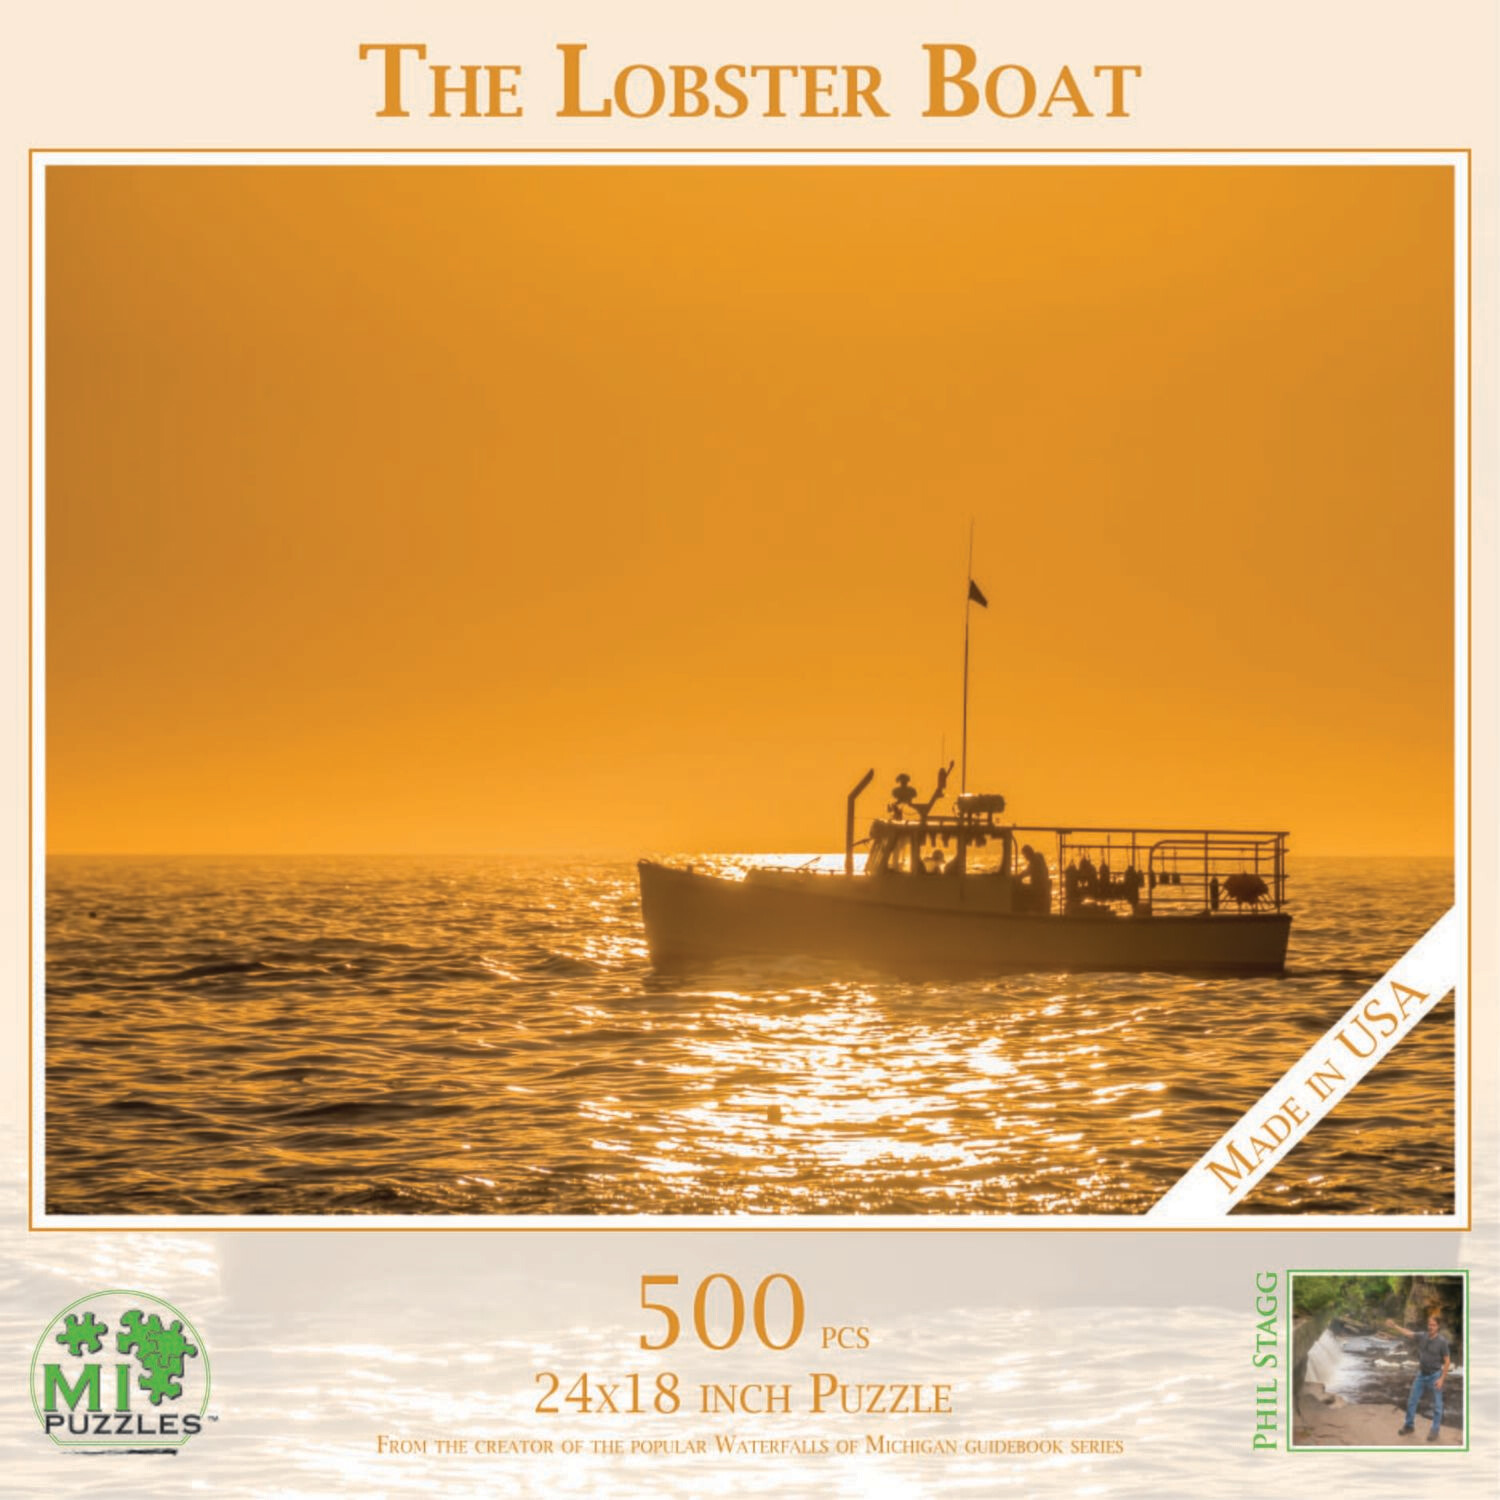 THE LOBSTER BOAT